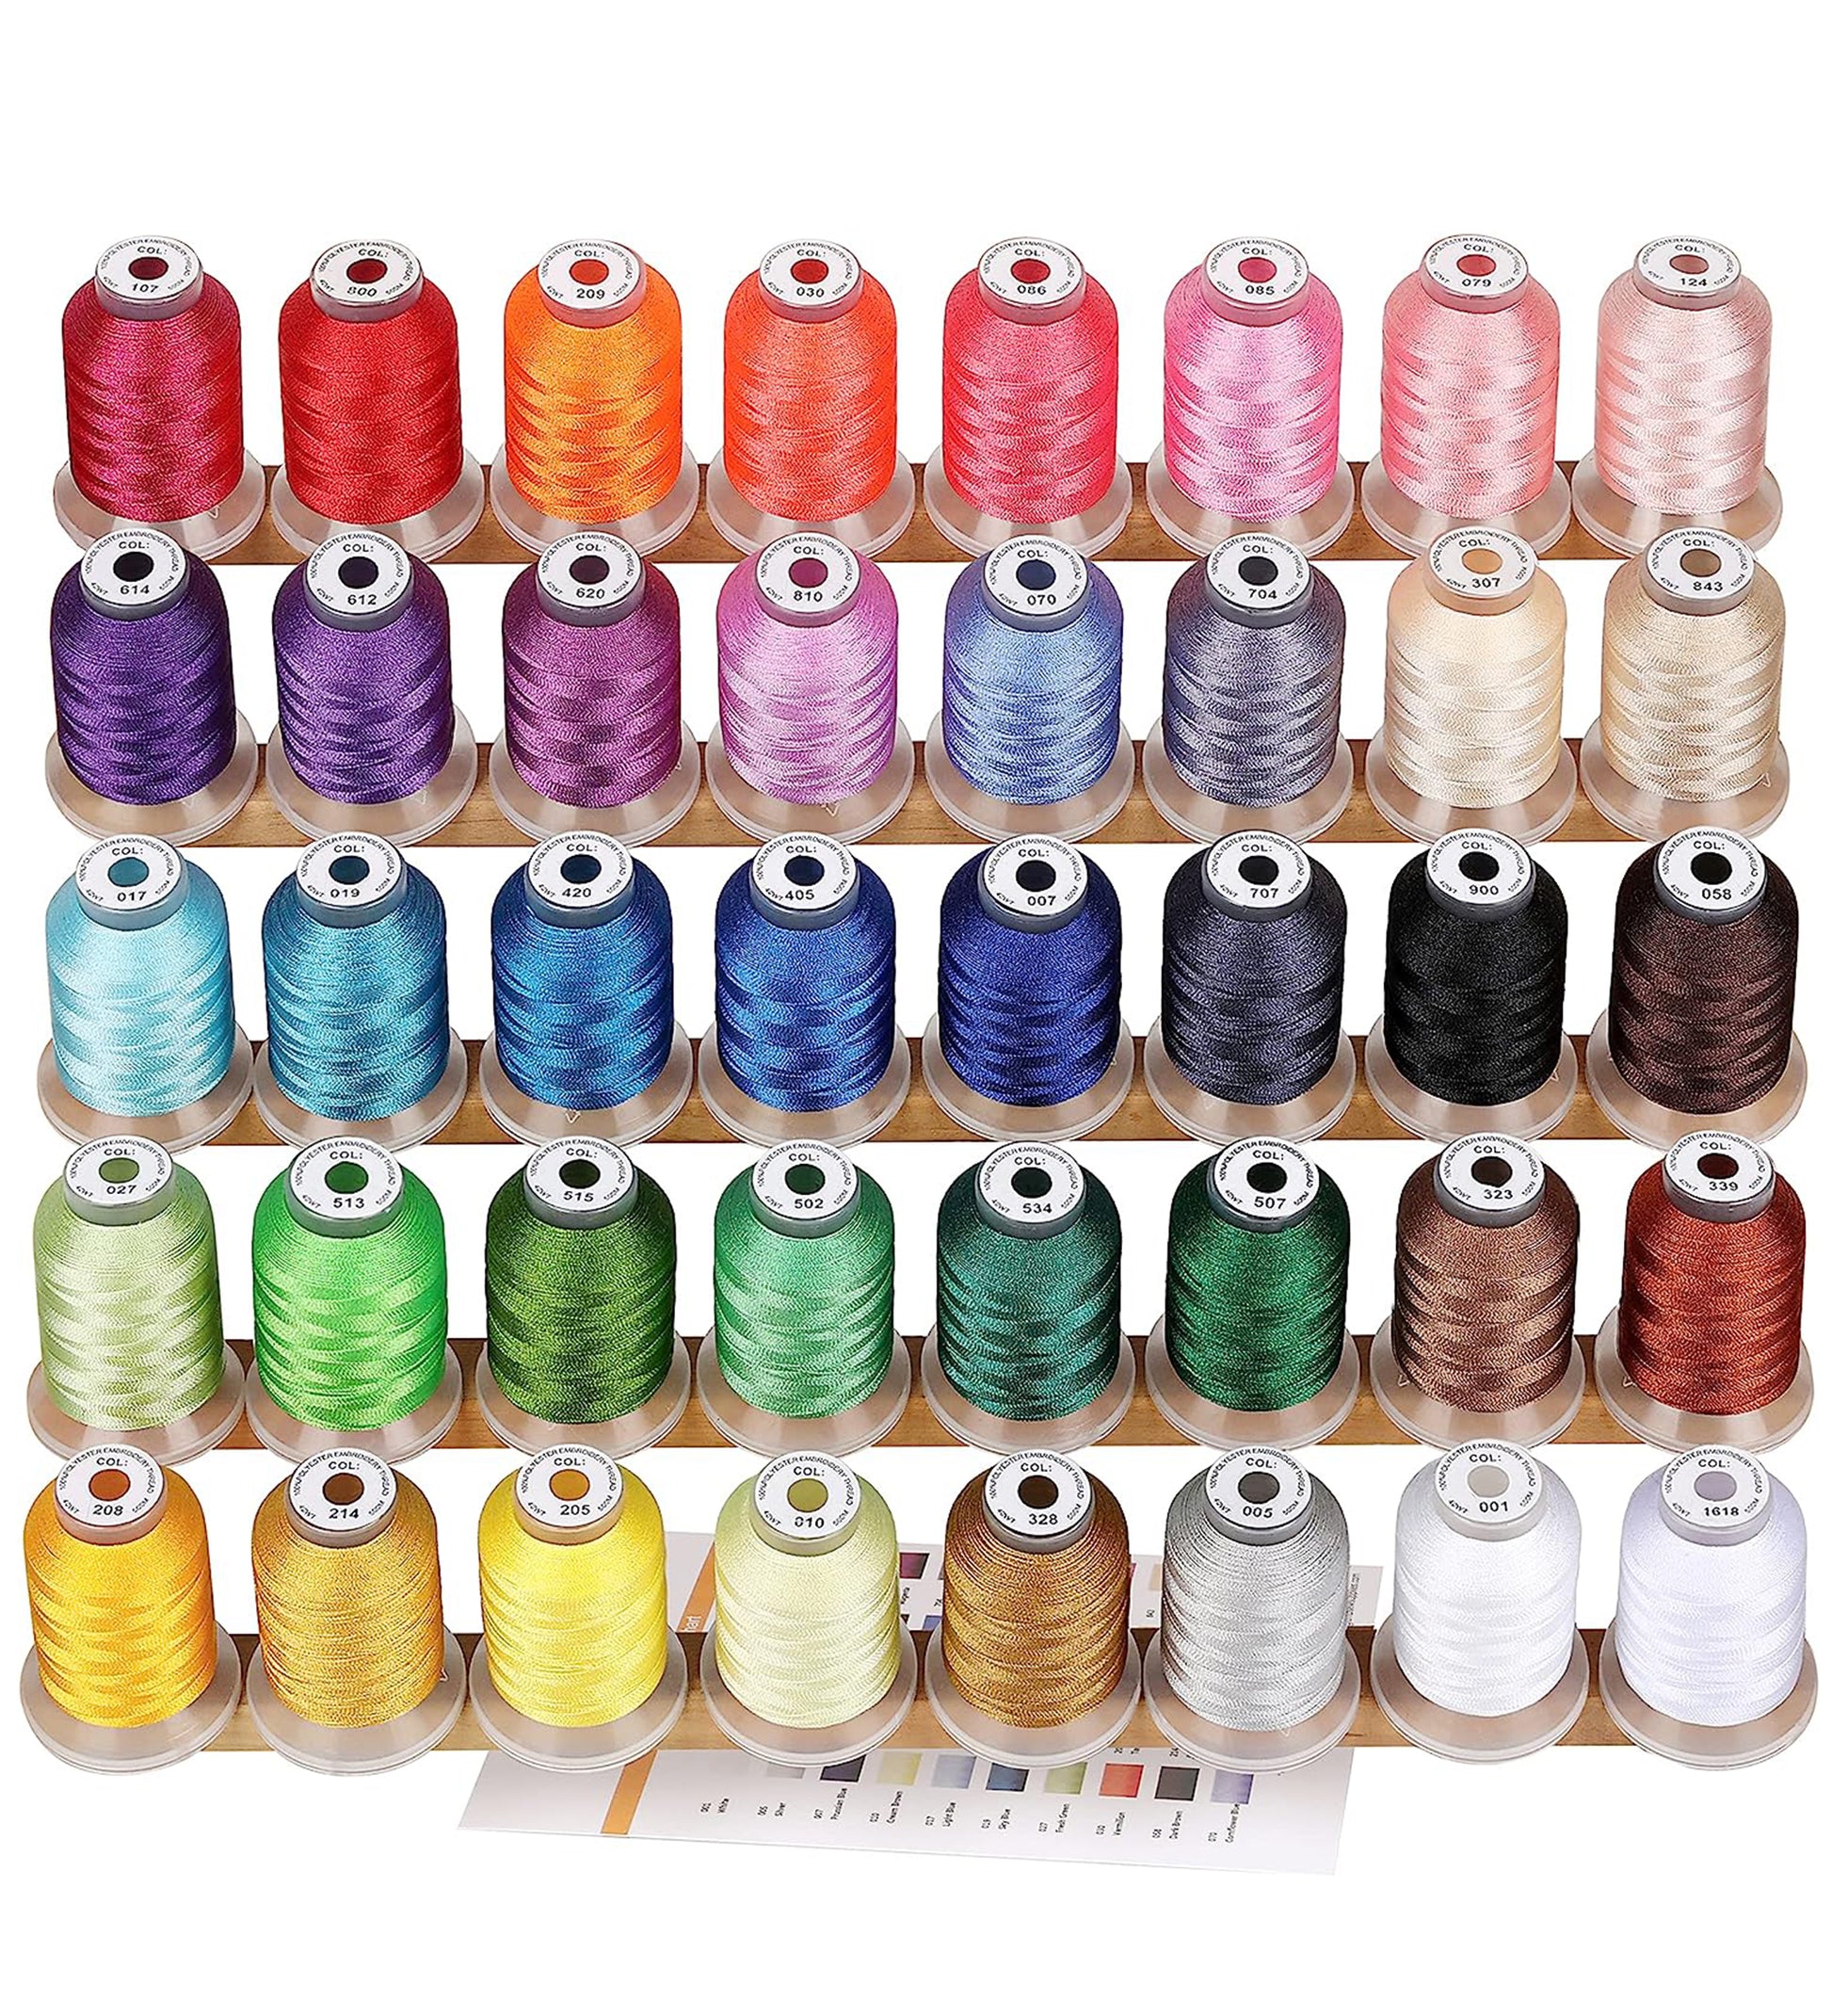 Brothread 50 Colors Variegated Polyester Embroidery Machine